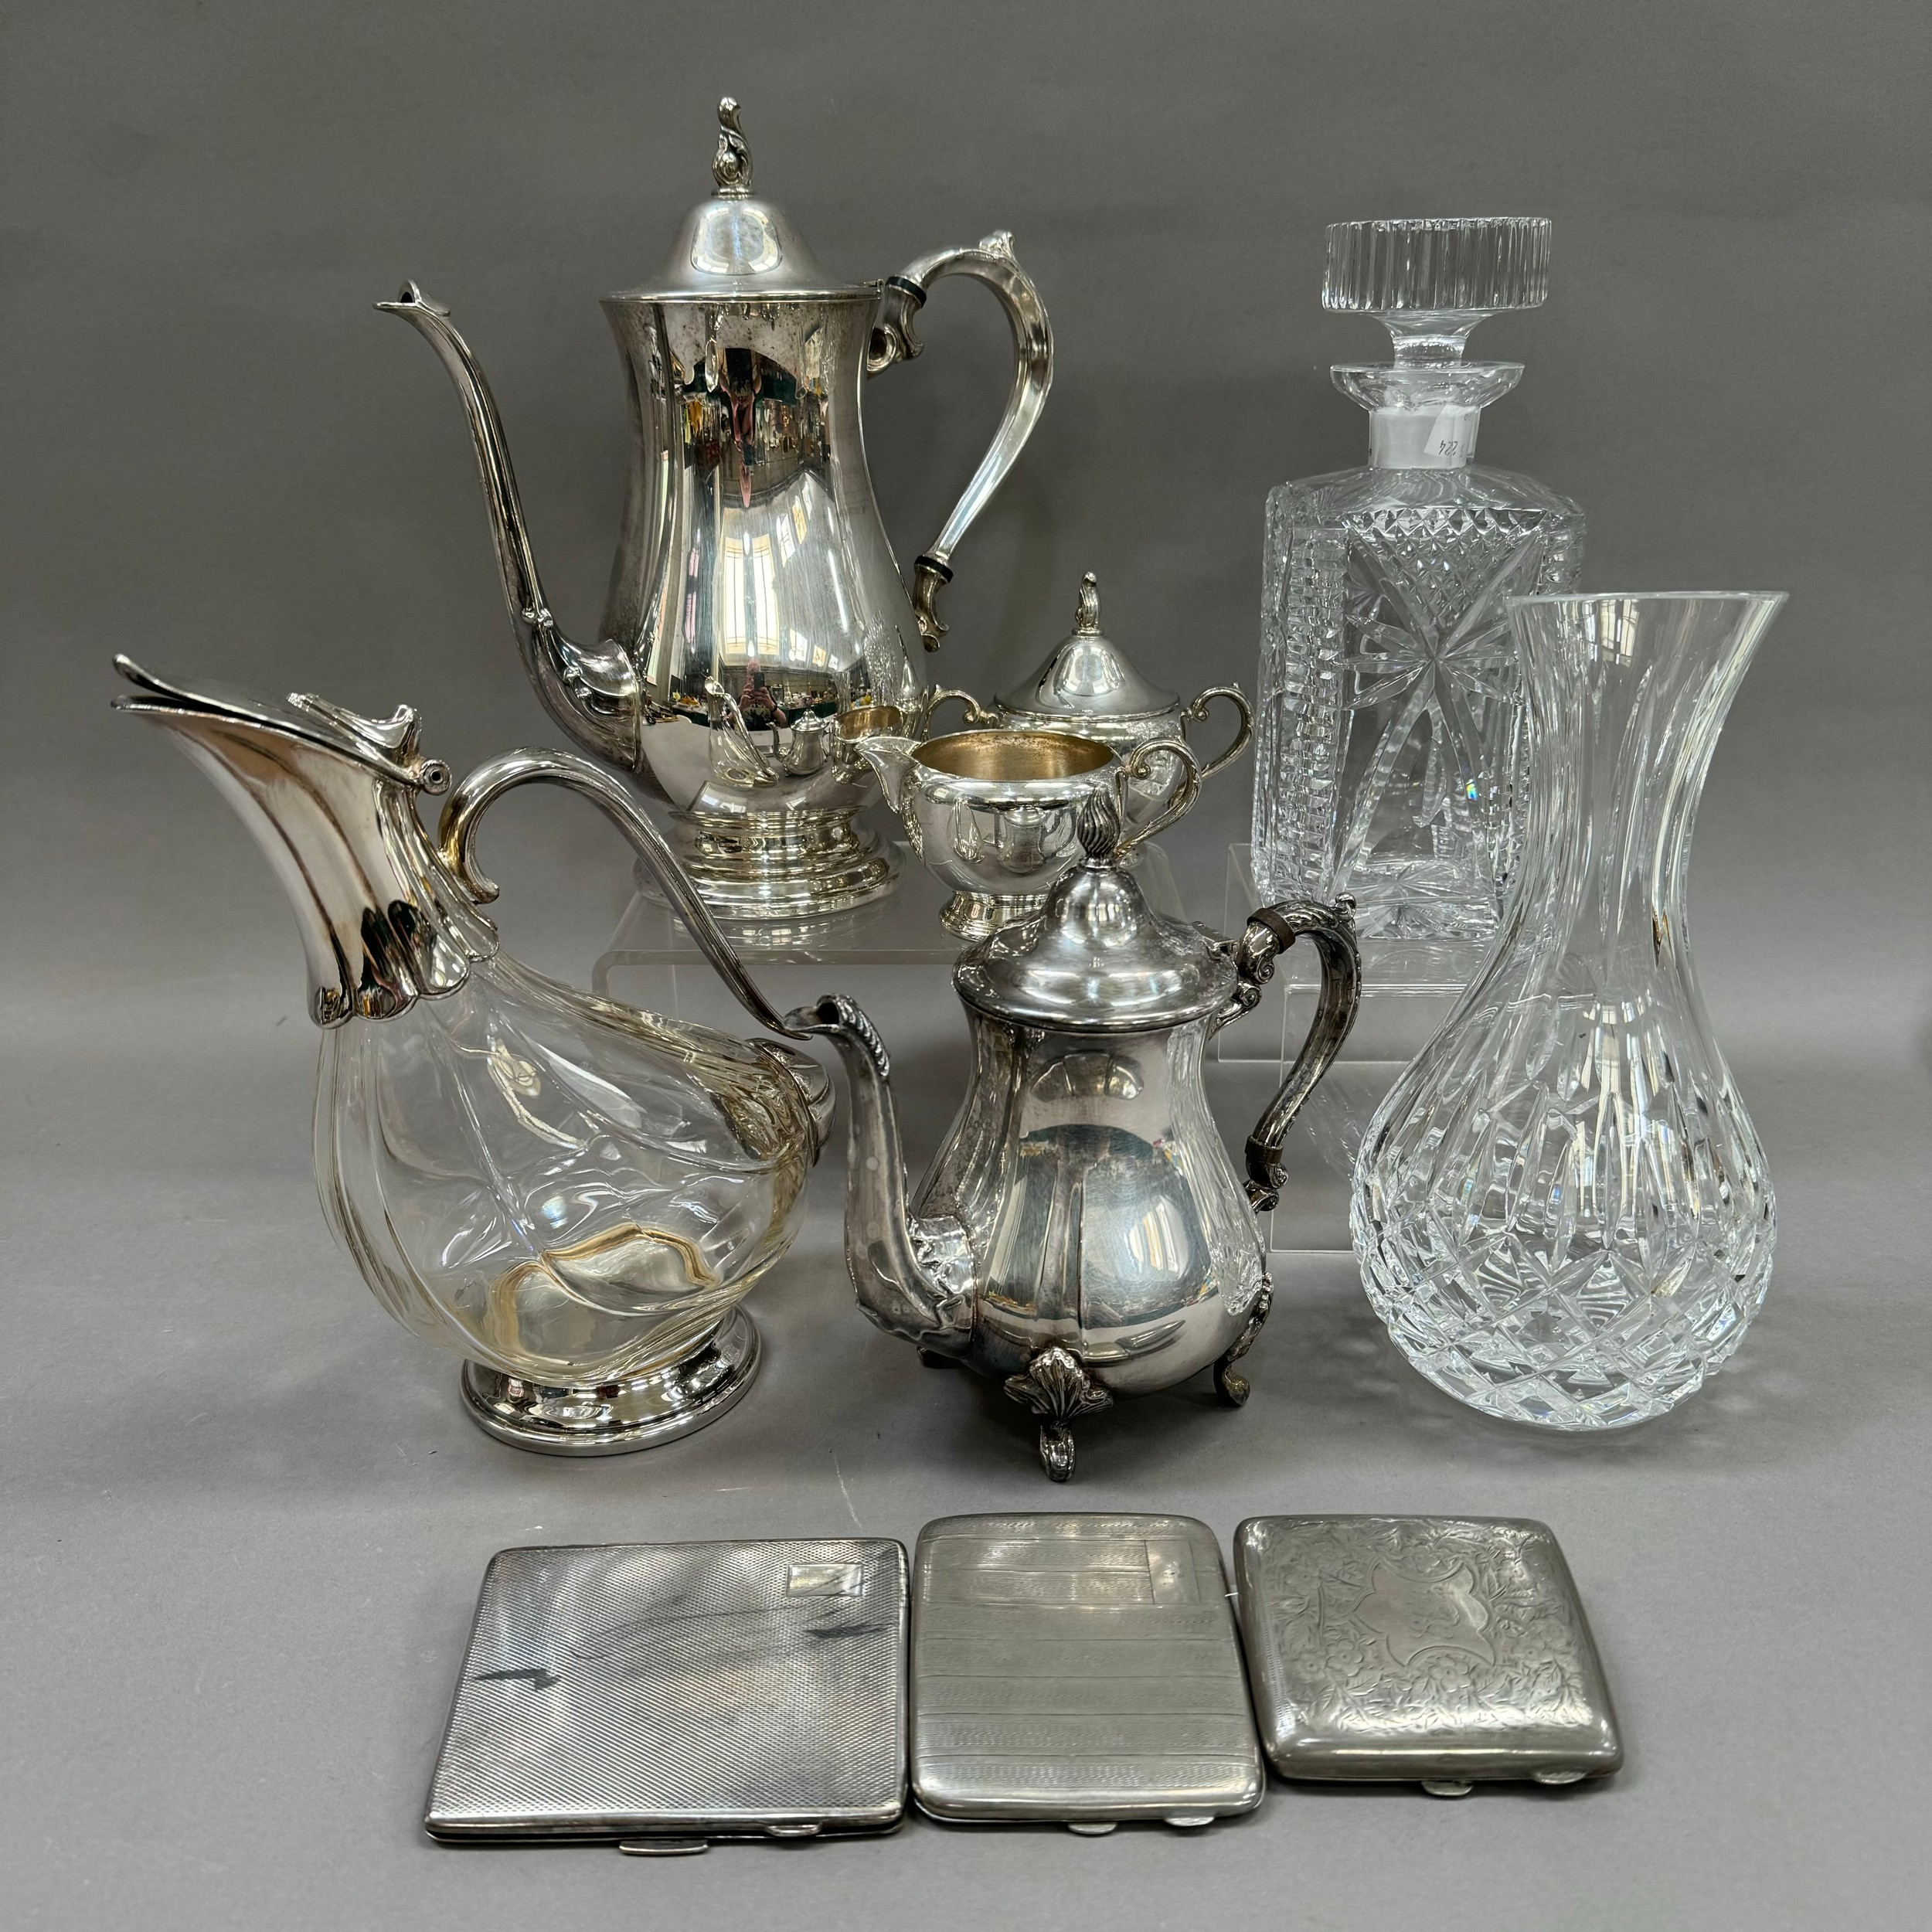 A three piece silver plated tea service and similar coffee pot, silver plated and glass wine